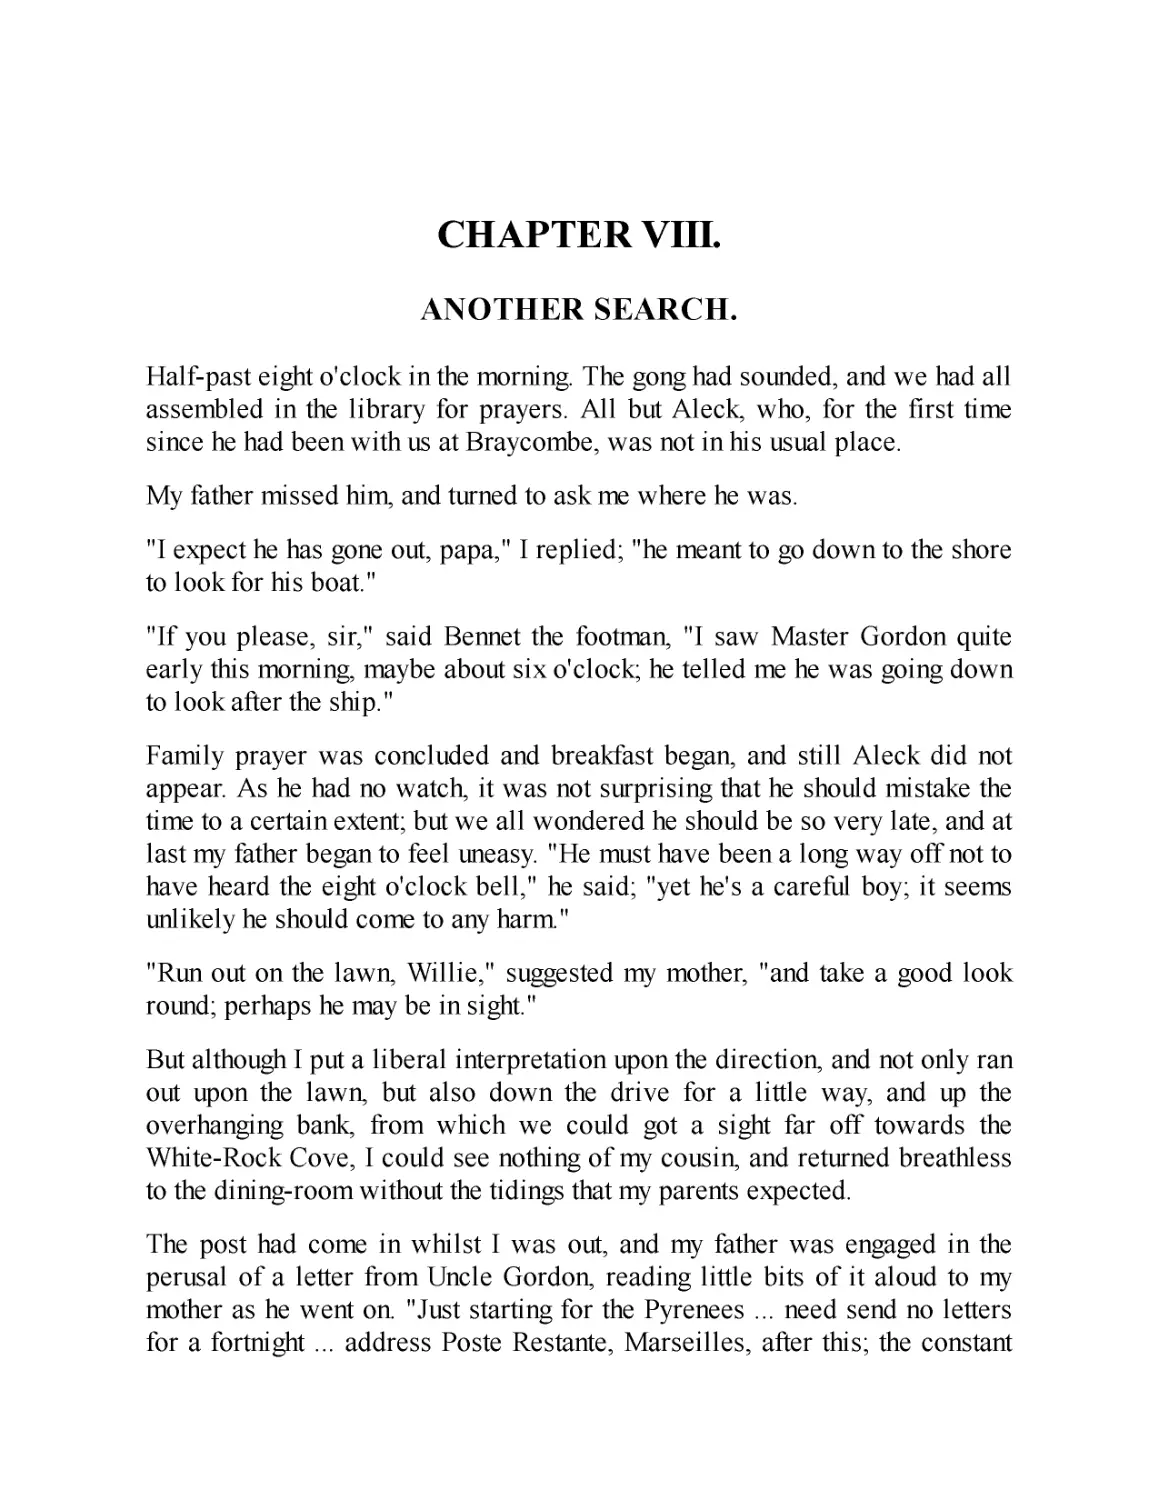 ﻿CHAPTER VIII